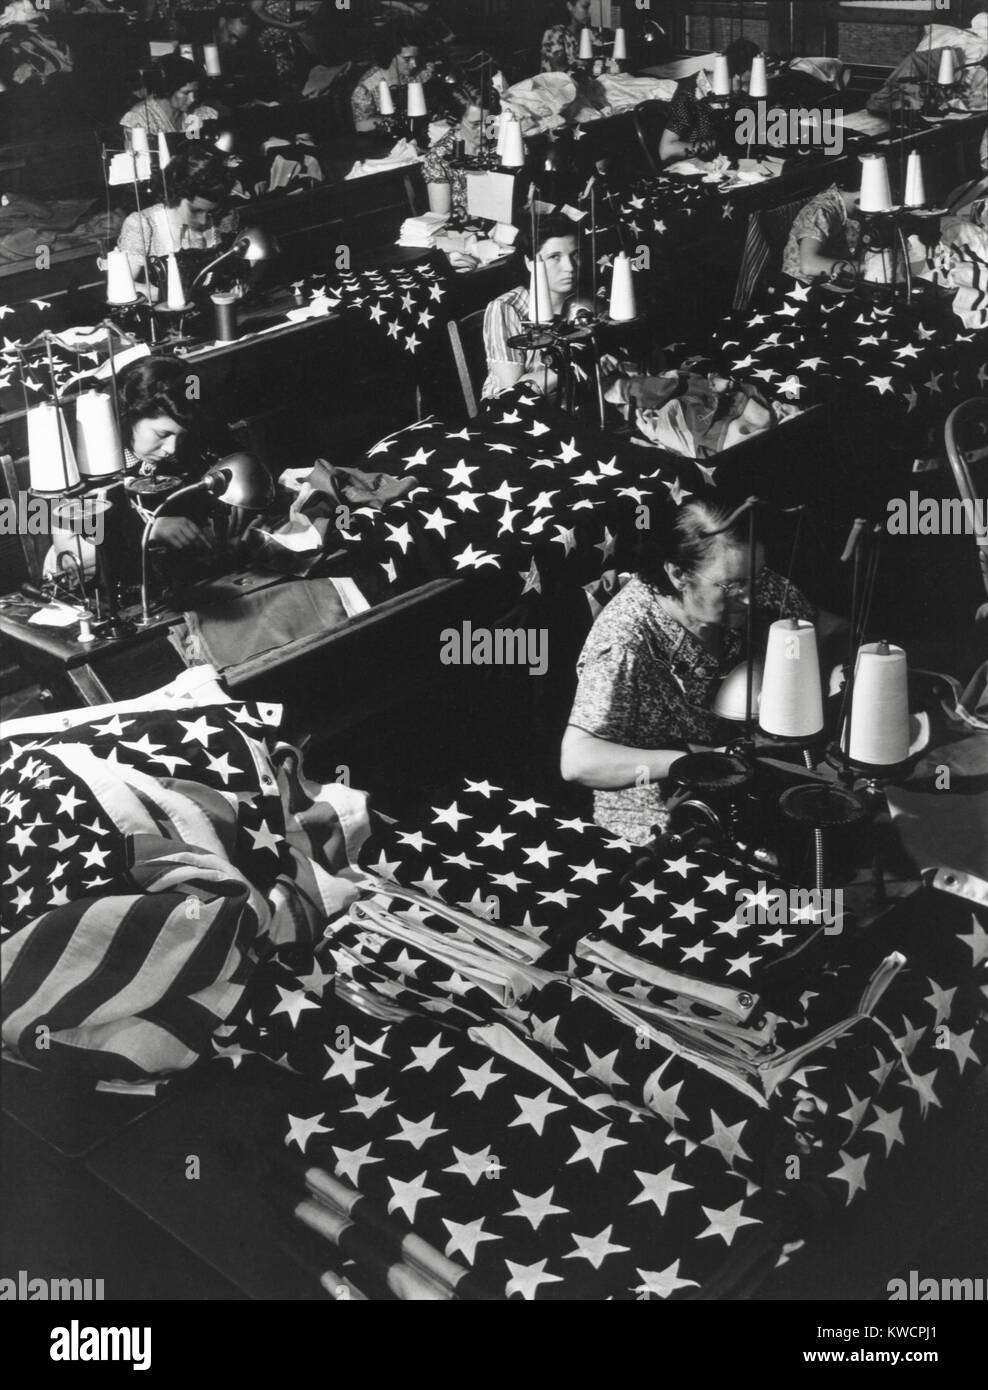 Women sewing American Flags in Brooklyn, New York City on July 24, 1940. Photo from the Records of Naval Districts and Shore Establishments, by Margaret Bourke-White. - (BSLOC 2015 1 196) Stock Photo